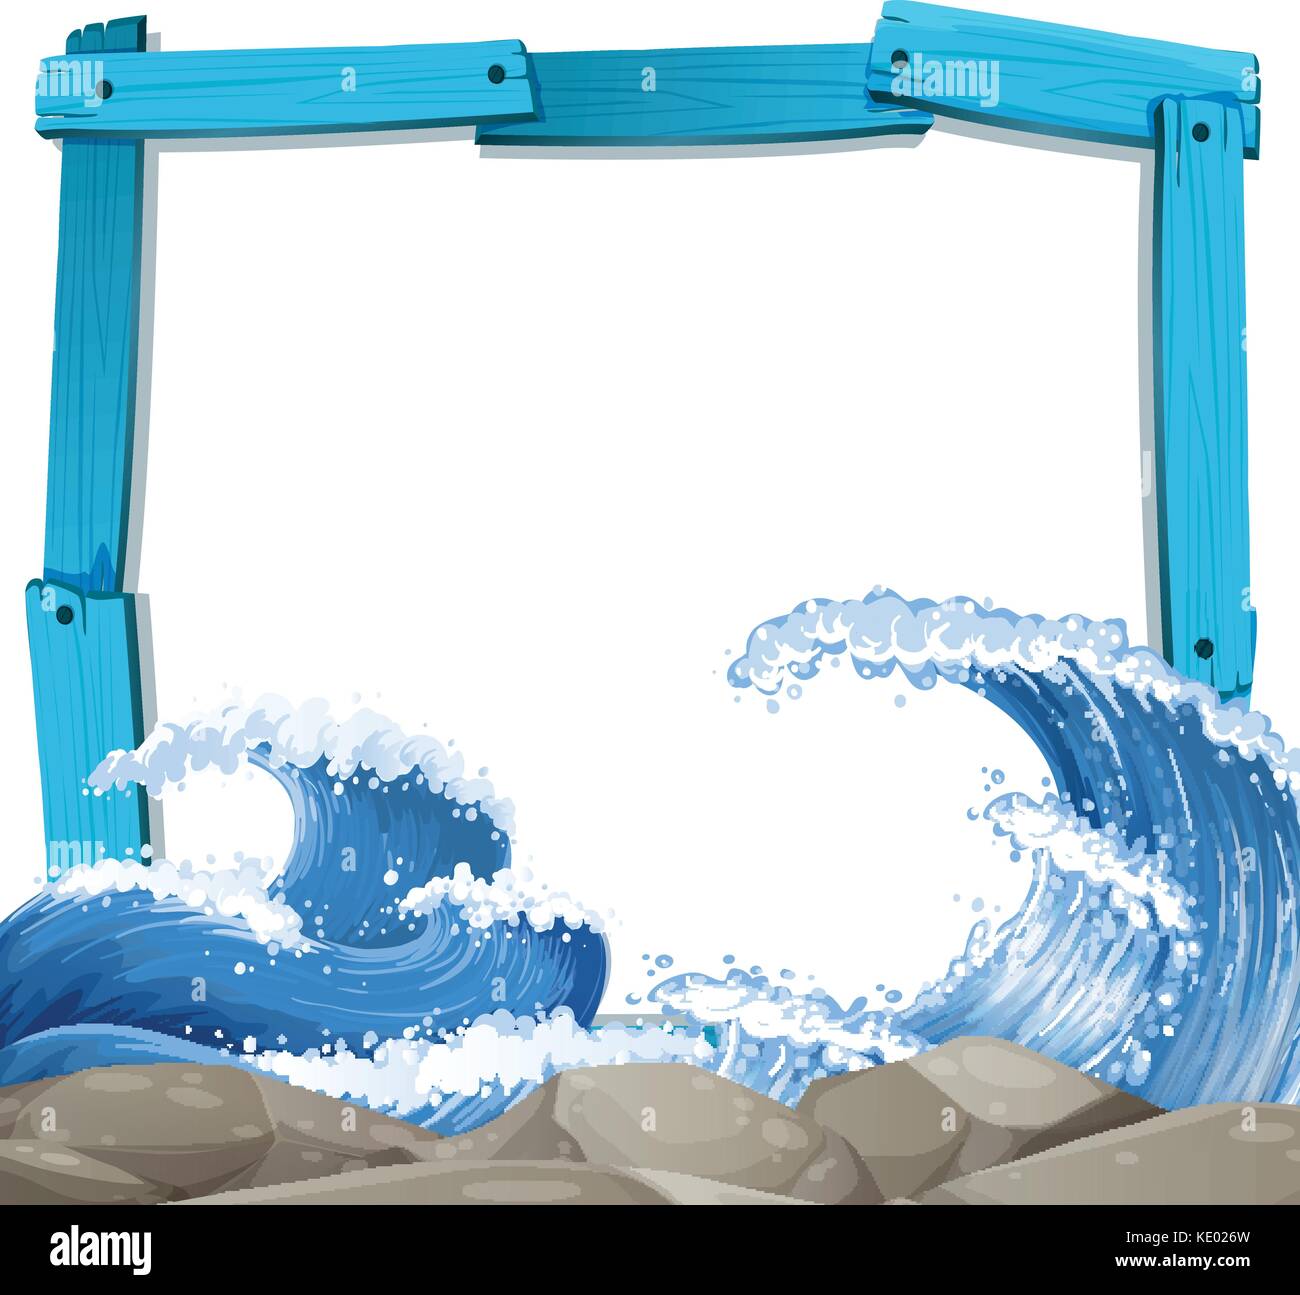 Blue frame template with giant waves background illustration Stock Vector